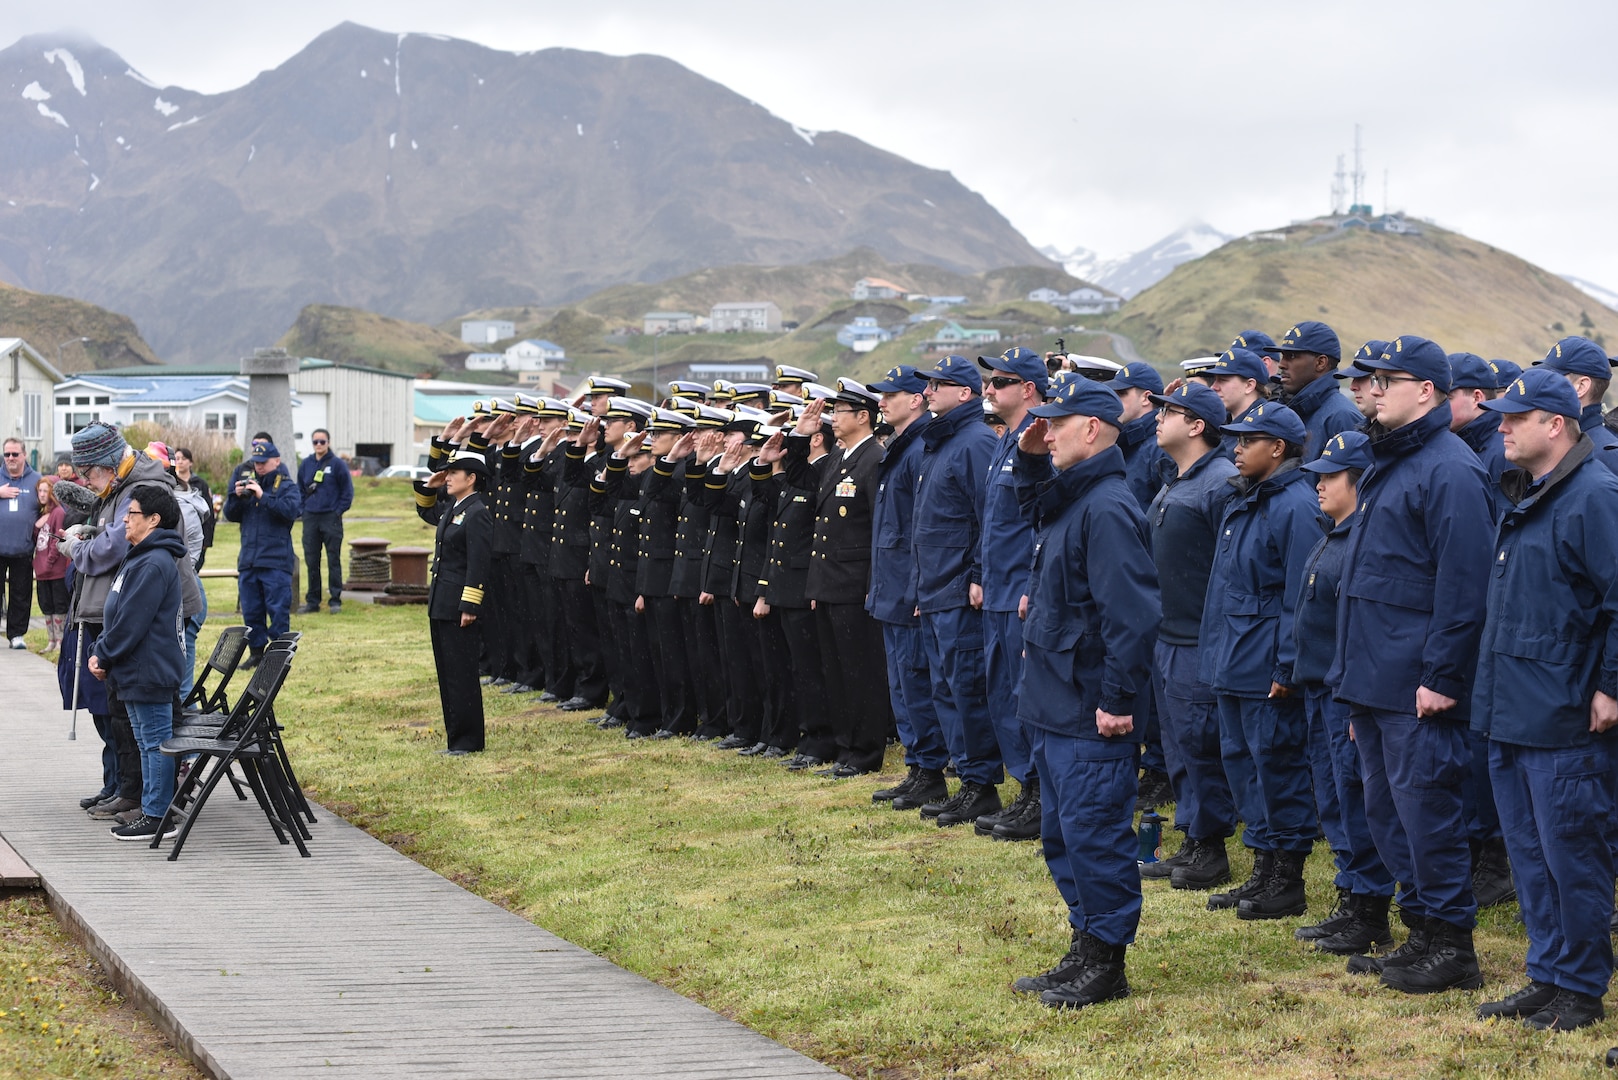 Crews from U.S. Coast Guard Cutter Bertholf (WMSL 750), Japanese Ship Kashima, and Japanese Ship Hatakaze hosted each other for tours and participated in athletic events while moored at Dutch Harbor in Unalaska June 5th and 6th, 2023.

The U.S. Coast Guard has a long-standing relationship of interoperability with Japan through operations like North Pacific Guard and training exercises, leading to a continued free and open Pacific. Engagement with the Japanese Maritime Self Defense Force demonstrates unity and strengthens rule-based order in the North Pacific. - U.S. Coast Guard photo by Lt. Cmdr. Scott McCann